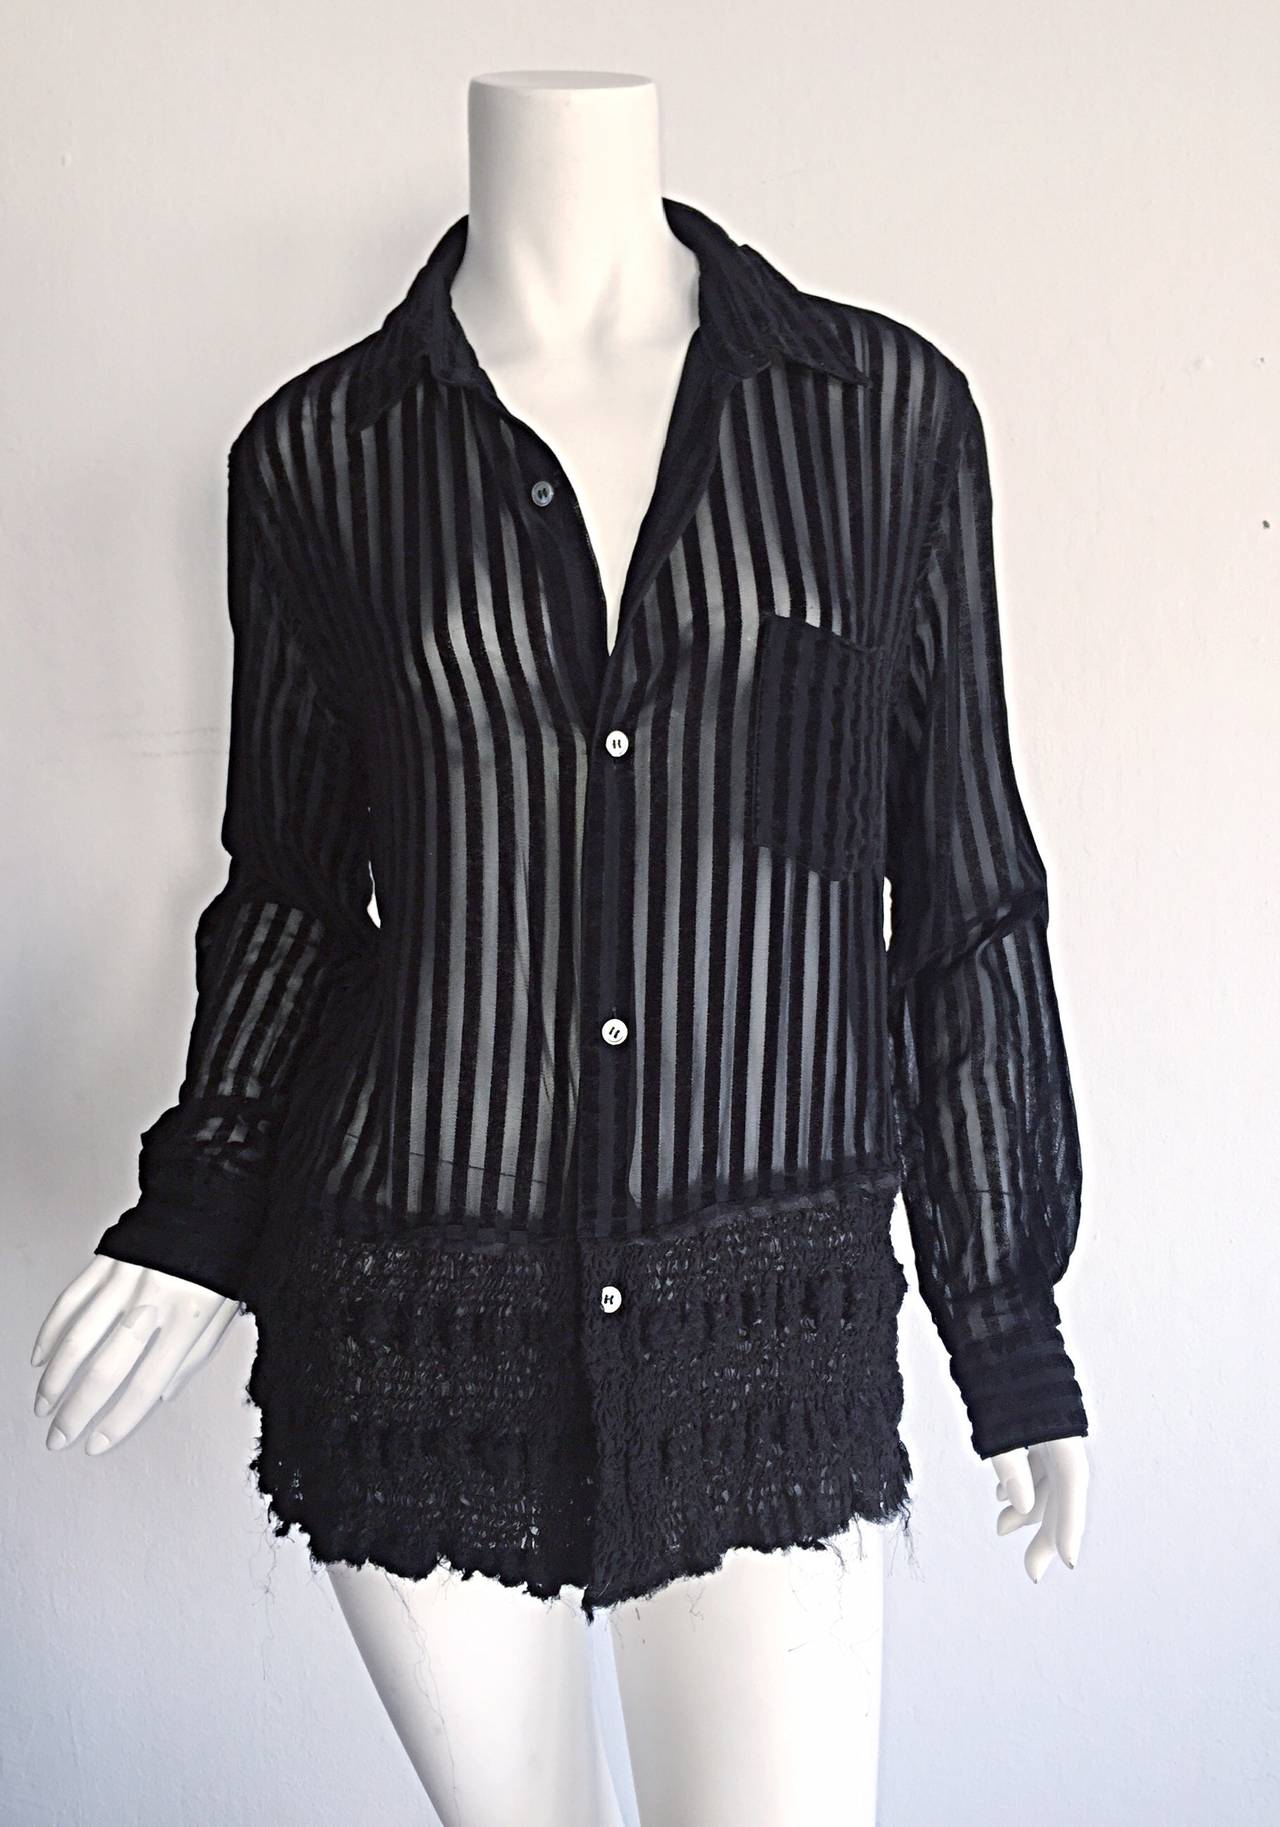 Rare 1990s vintage Comme des Garçons black and sheer striped top! Features vertical silk bodice and back, with signature sheared sweater hem on front. Front breast pocket. Buttons at each cuff. Easy to dress up or down. In great condition. Marked